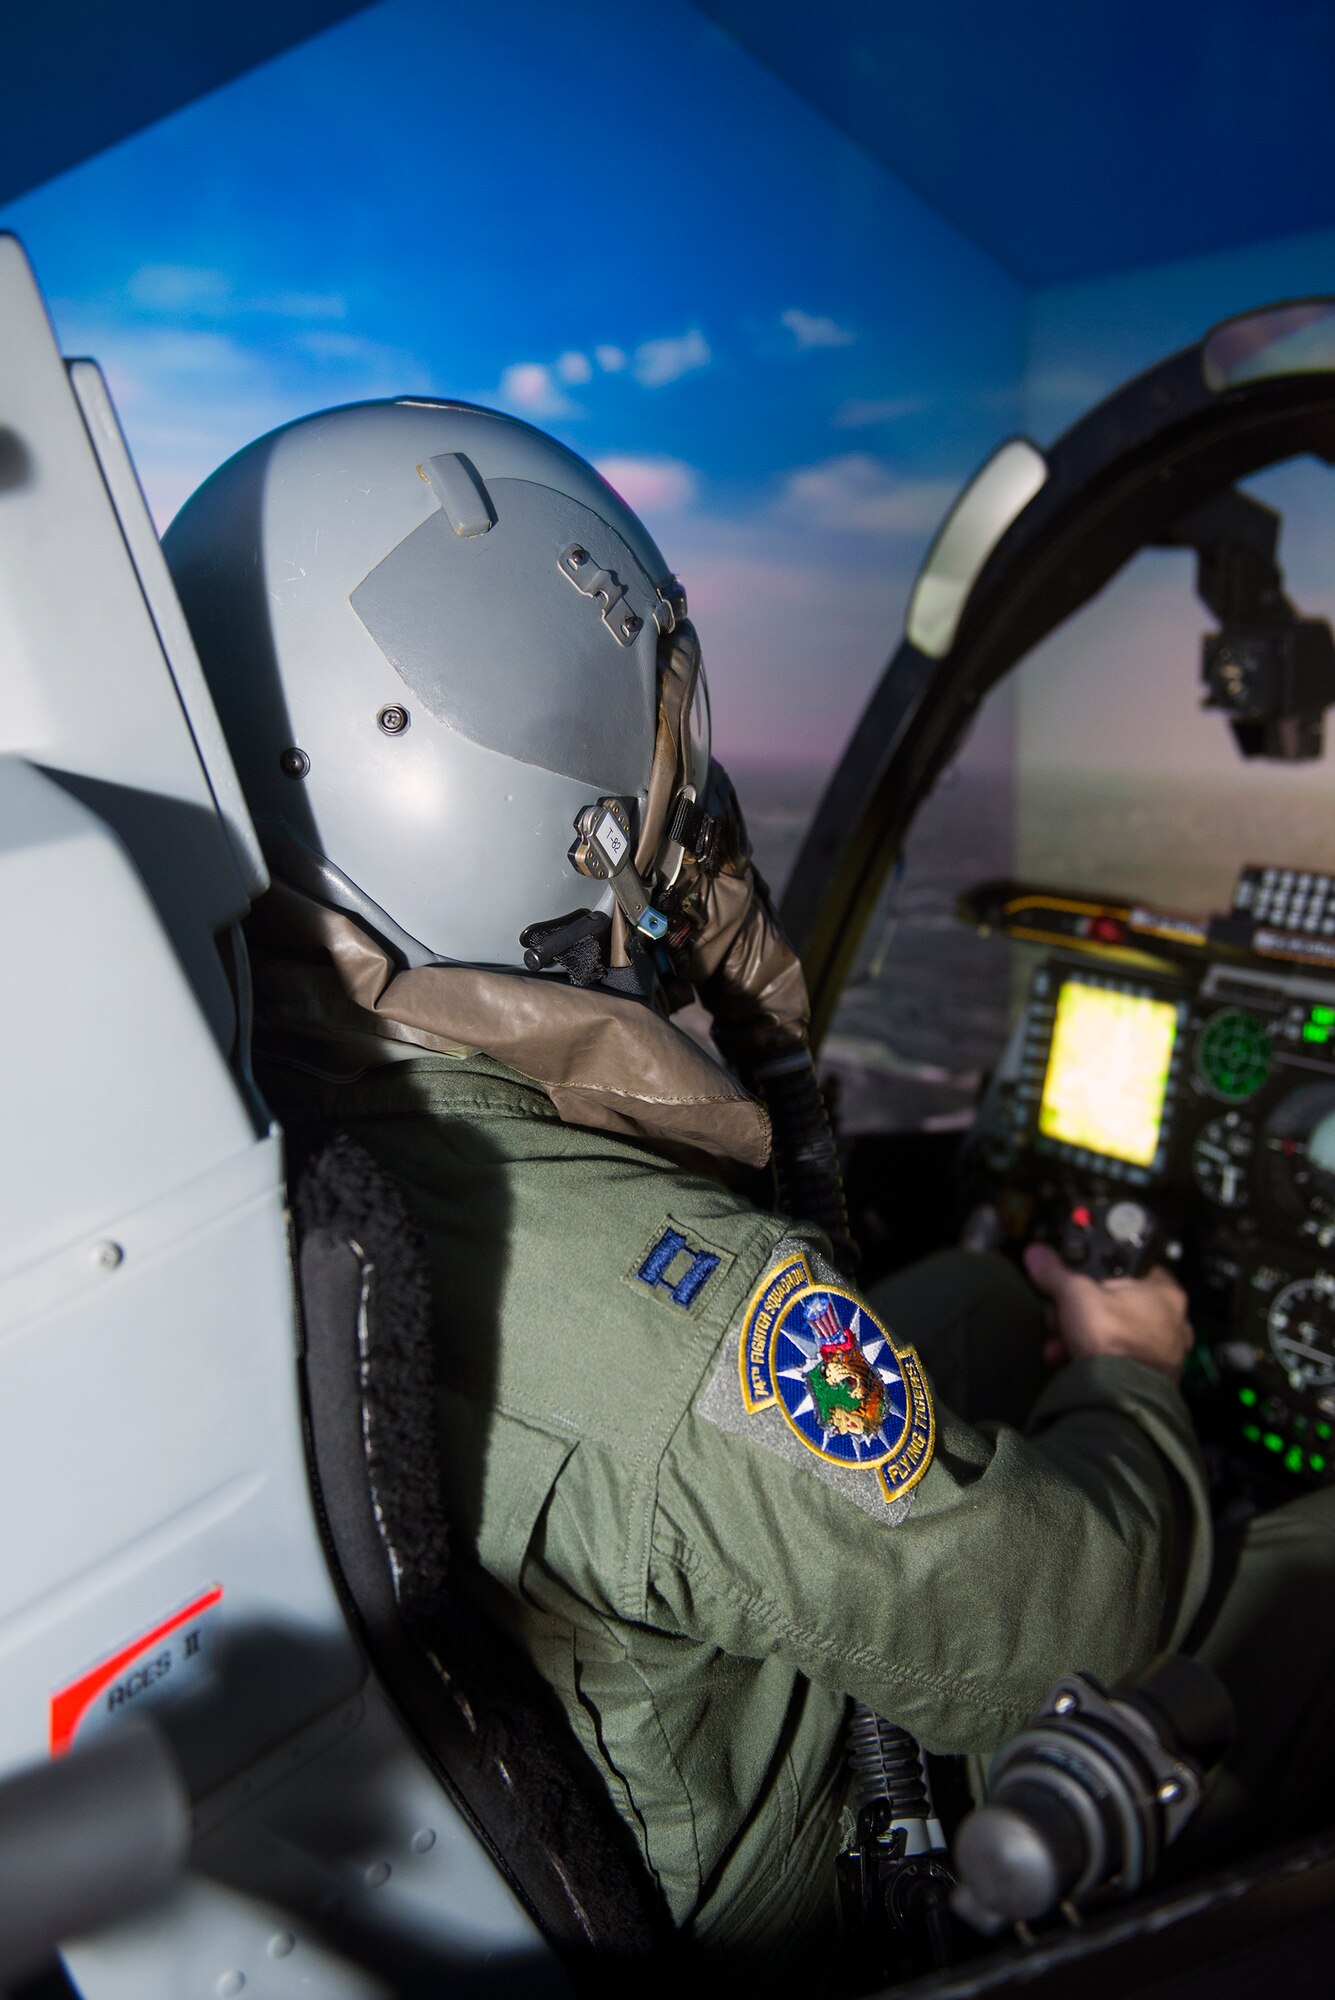 U.S. Air Force Capt. Thomas Ainscough, 74th Fighter Squadron pilot, performs tactical training in an A-10C Thunderbolt II Full Mission Trainer Sept. 2, 2015, at Moody Air Force Base, Ga. The simulator is designed to train the 74th and 75th Fighter Squadron’s A-10 pilots on flight proficiency through tactical and simulated emergency procedure training. (U.S. Air Force photo by Airman Greg Nash/Released)